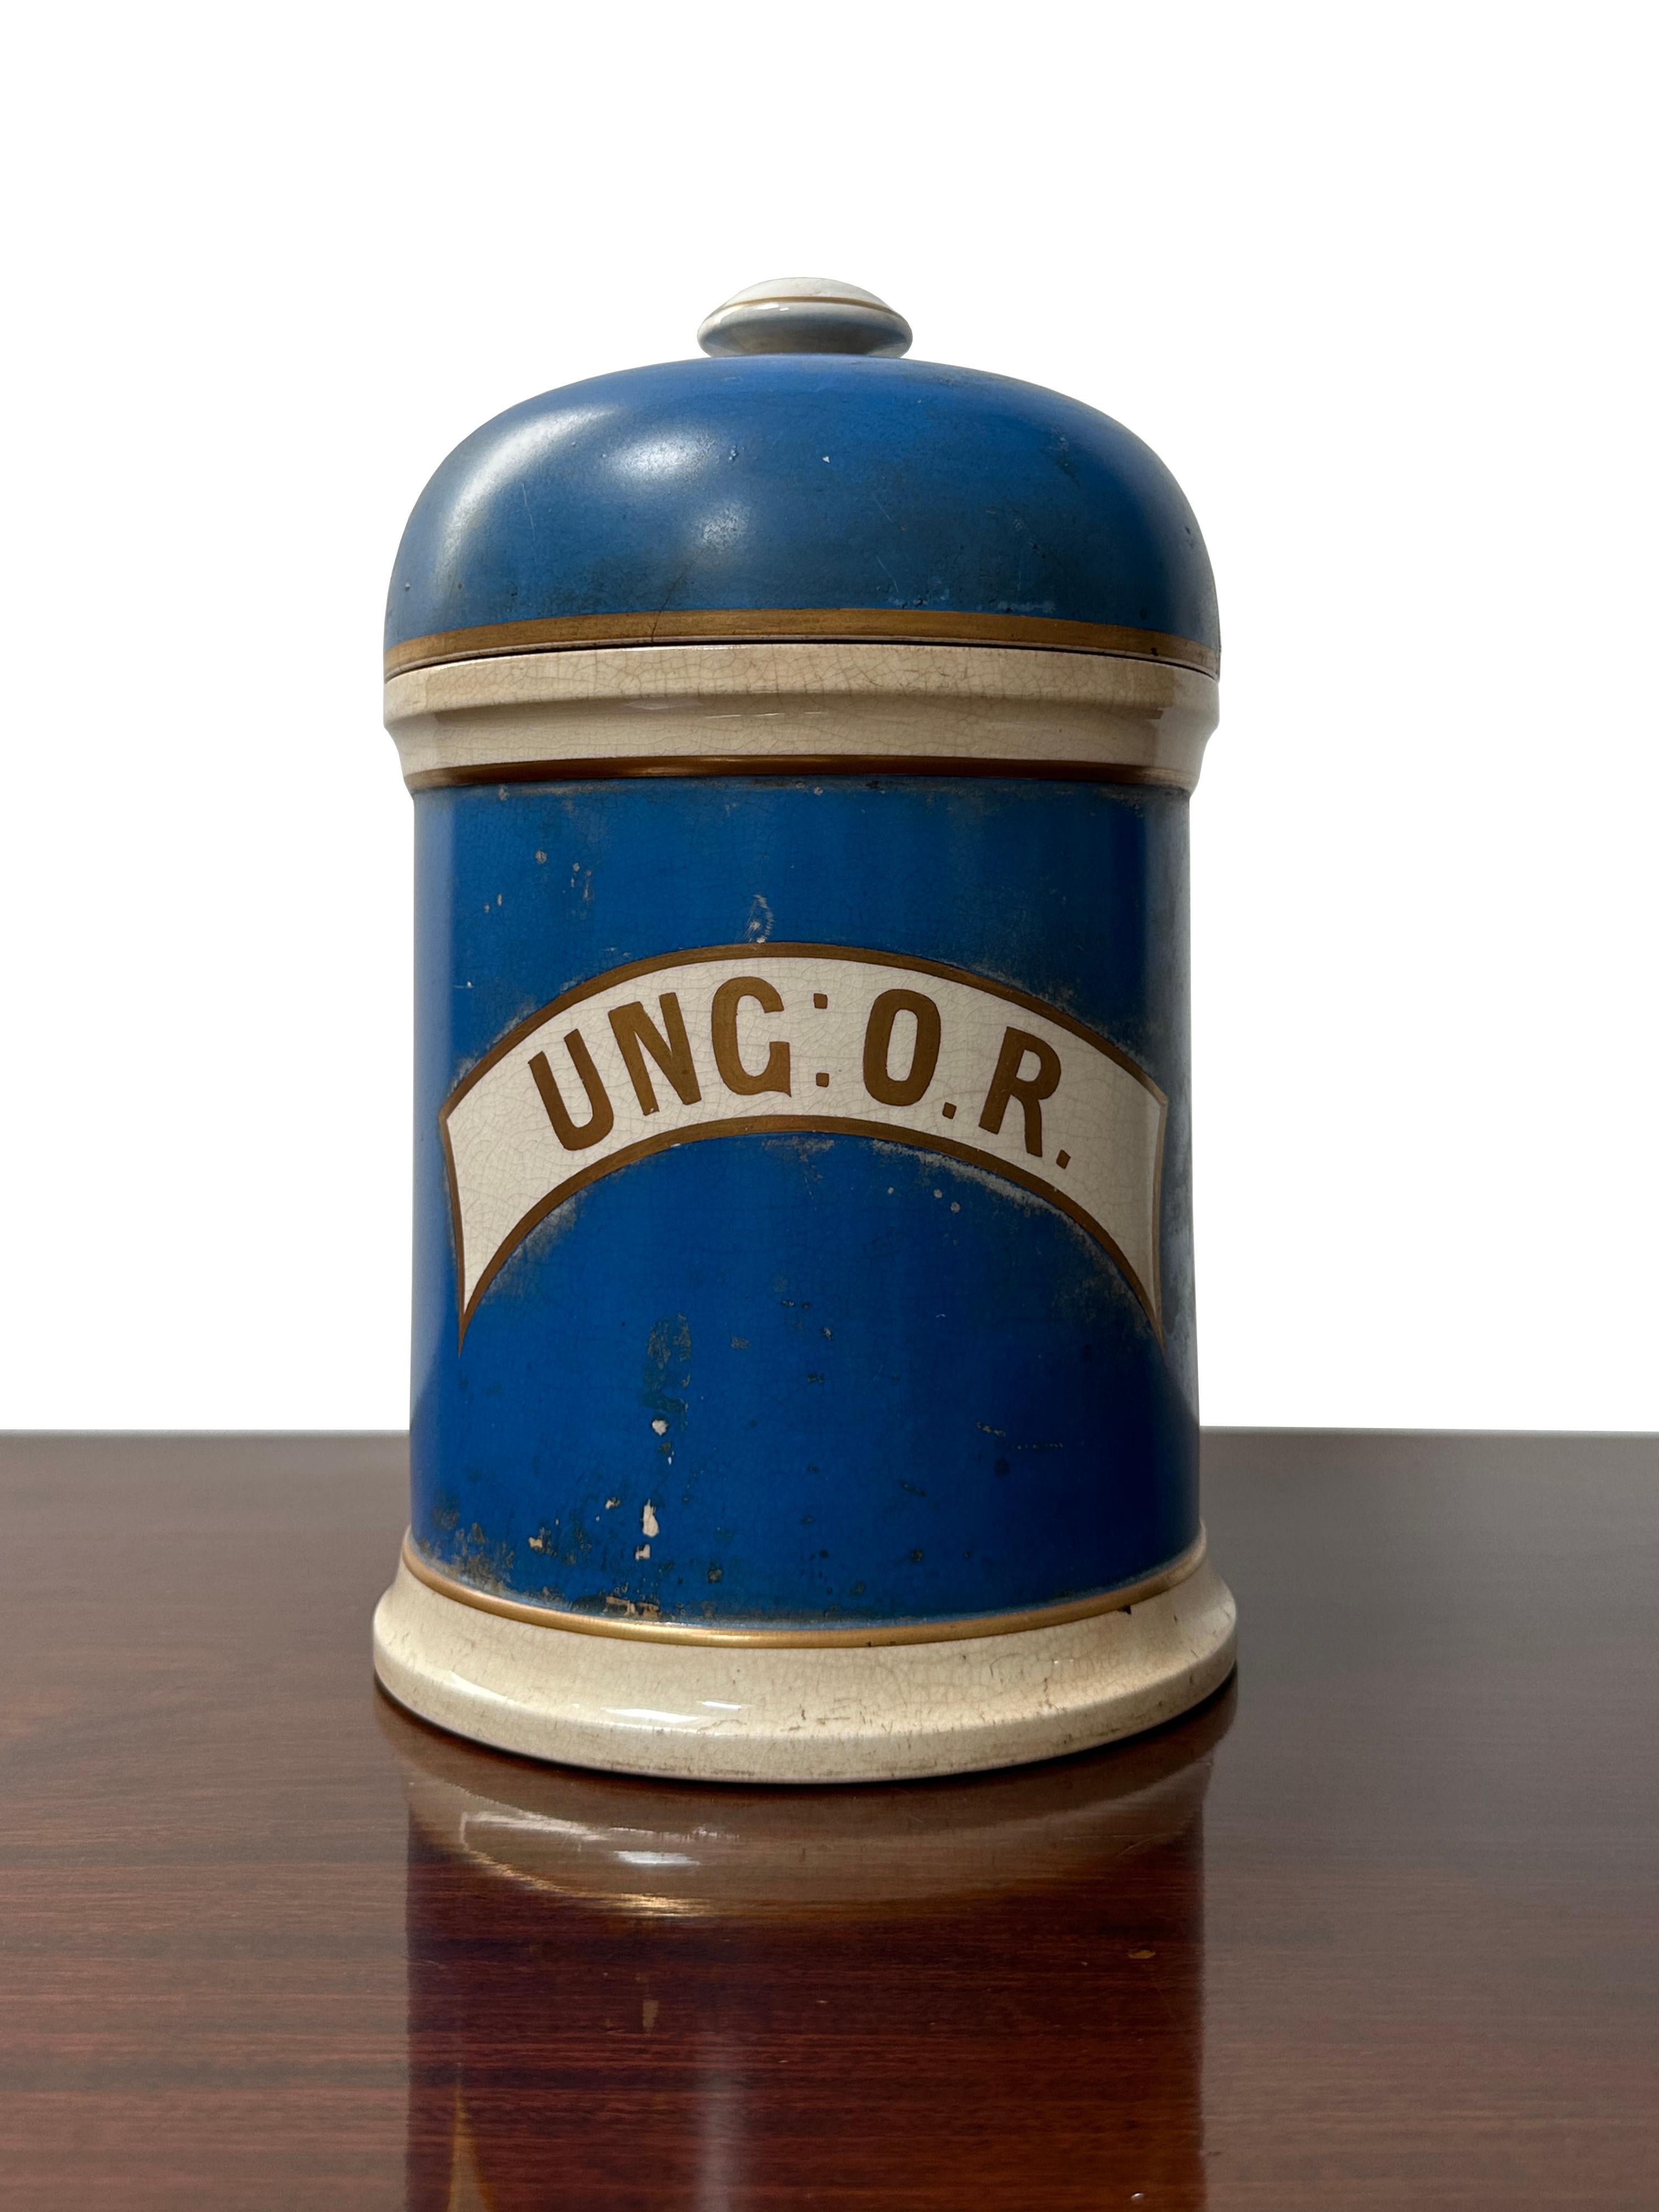 - A beautiful blue, white and gold Victorian apothecary jar, circa 1900.
- The jar still contains its original blue, white and gold paint with the inscription 'UNG: O.R.' across the front, wonderful example.
- The lid has had a break at some point